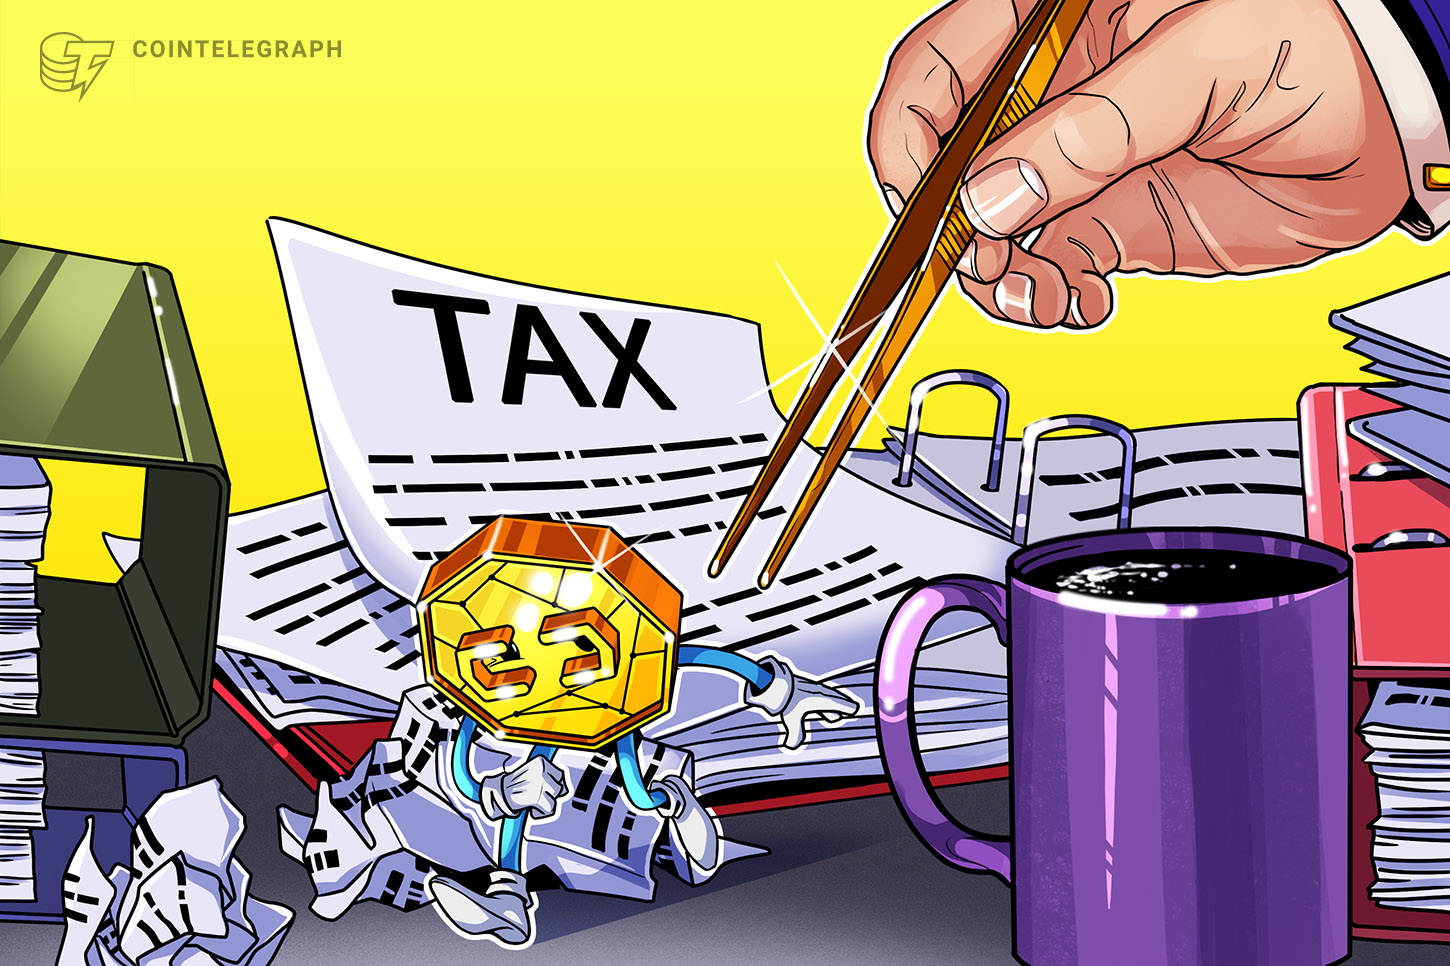 Australian Tax Office seeks data from 1.2M crypto exchange users: Report